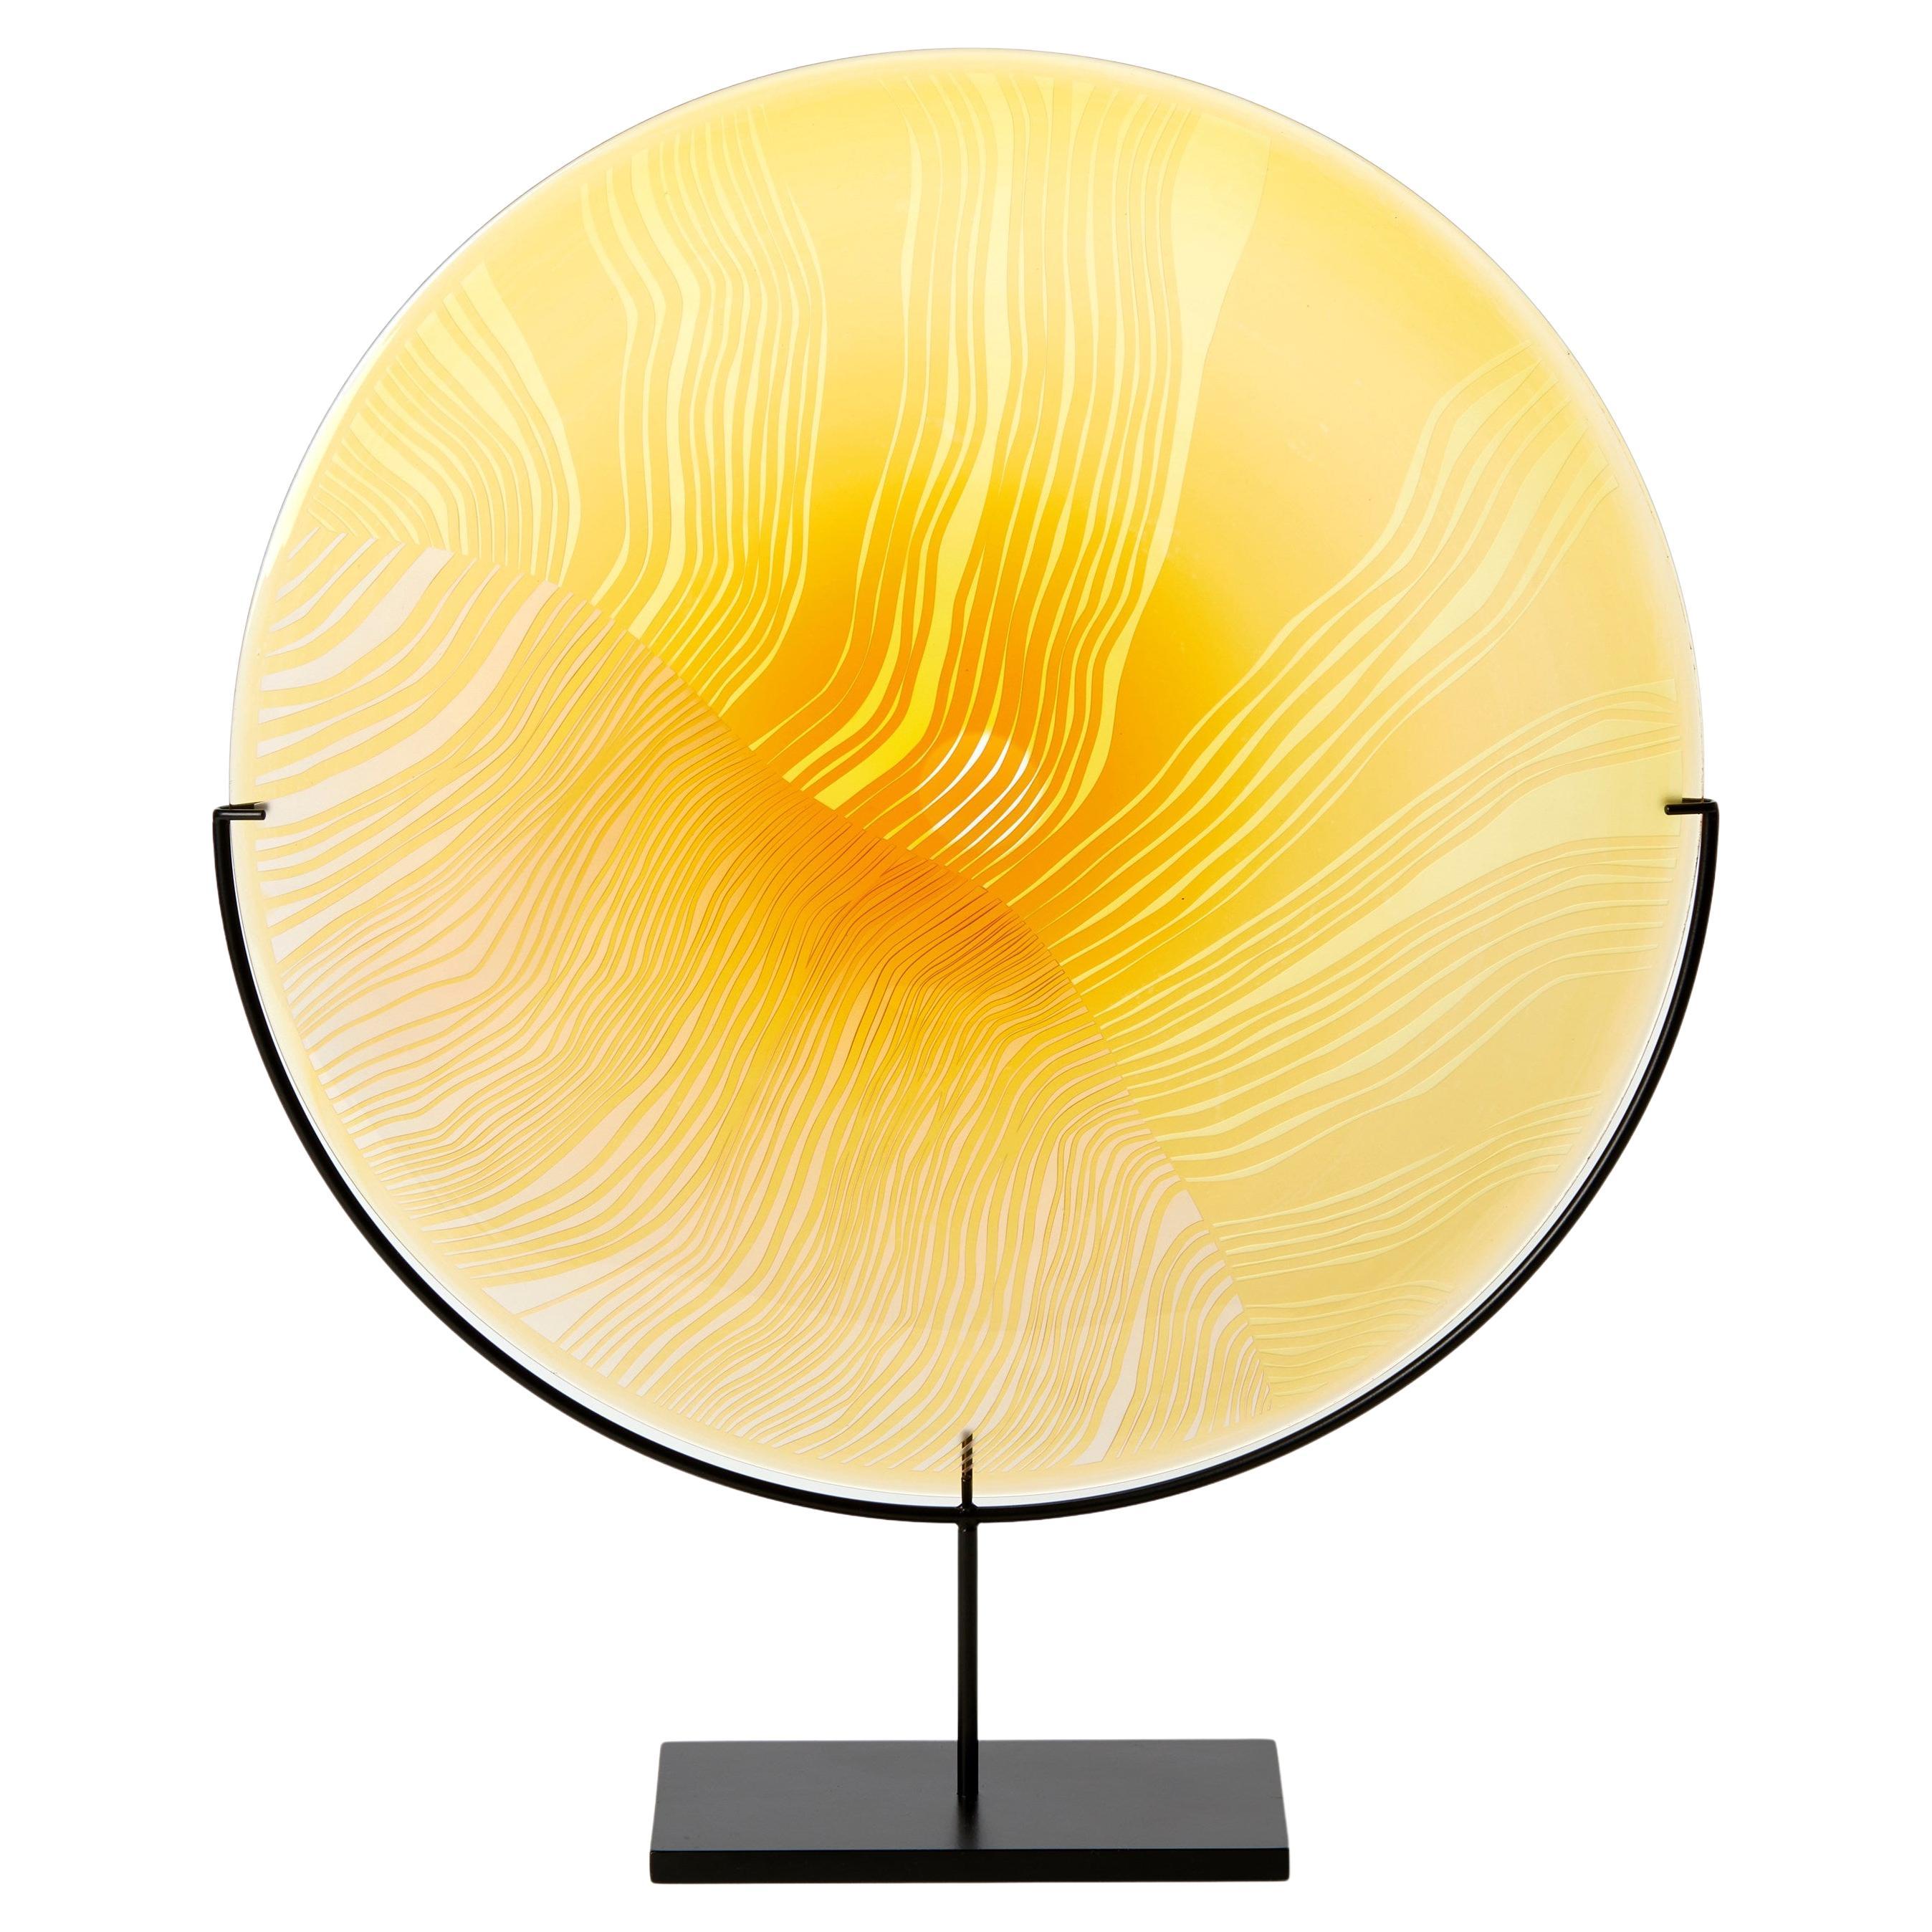 Solar Storm Gold over Gold, a mounted cut glass rondel artwork by Kate Jones For Sale